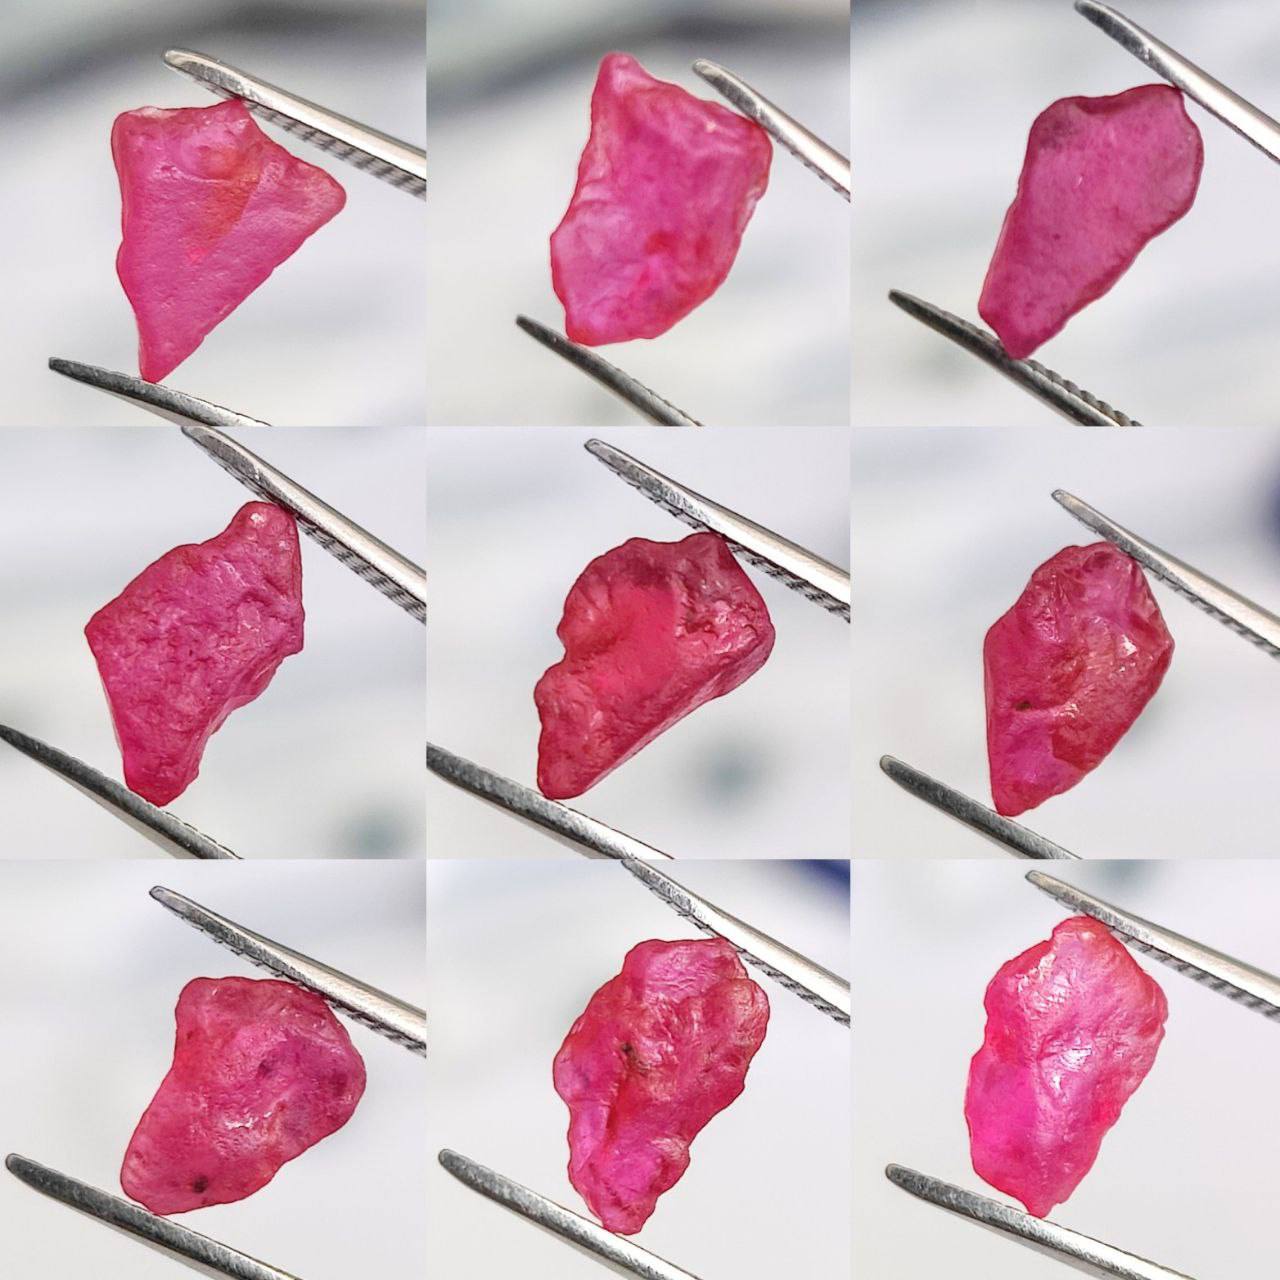 Mozambique Ruby Rough, Wholesale Ruby,Ruby Rough